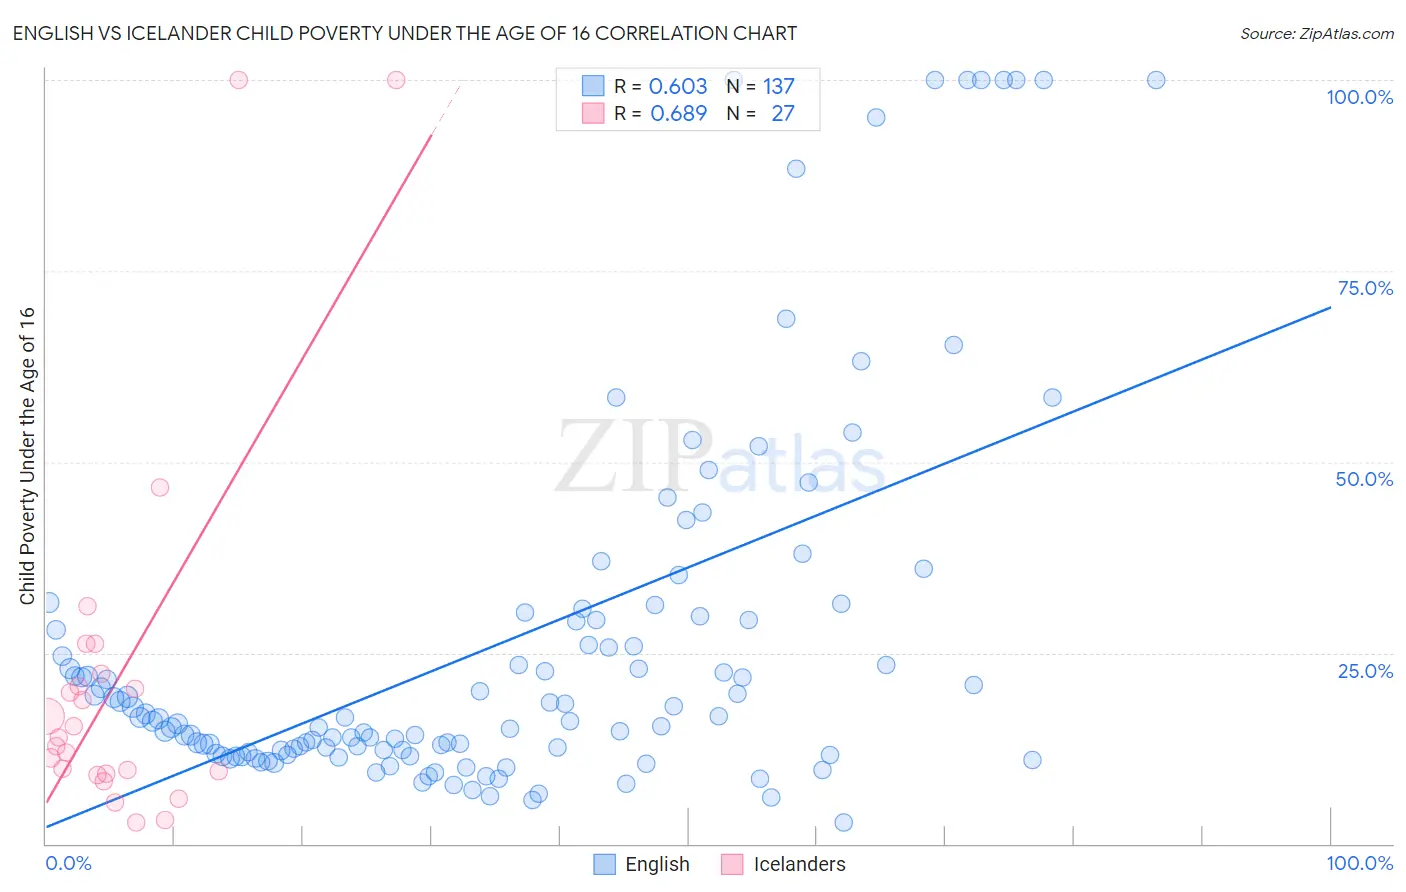 English vs Icelander Child Poverty Under the Age of 16